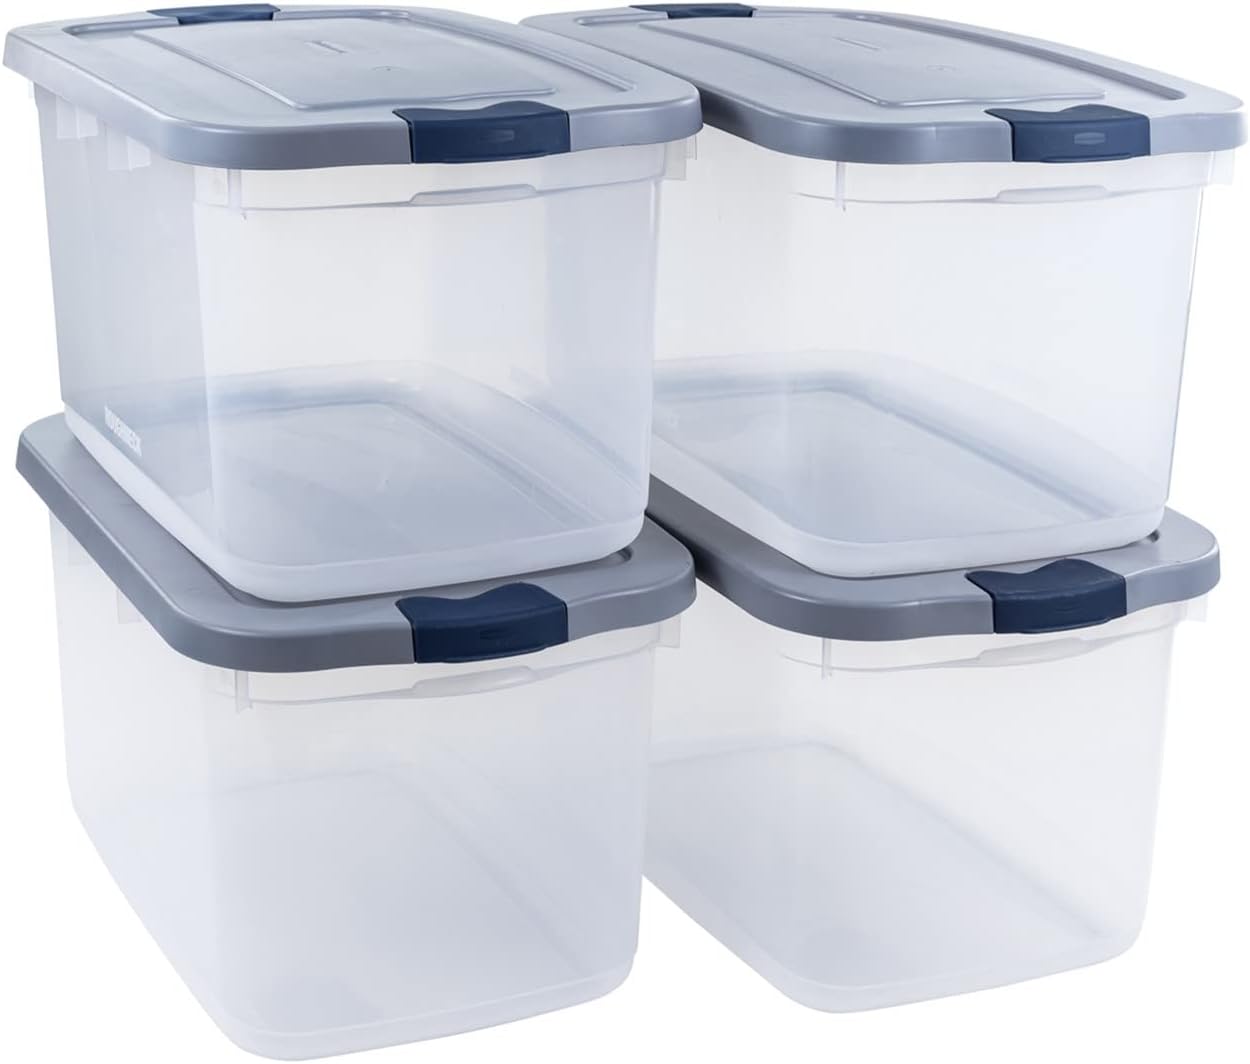 https://discounttoday.net/wp-content/uploads/2023/10/Rubbermaid-Roughneck-Clear-66-Qt-16.5-Gal-Storage-Containers-Pack-of-4.jpg